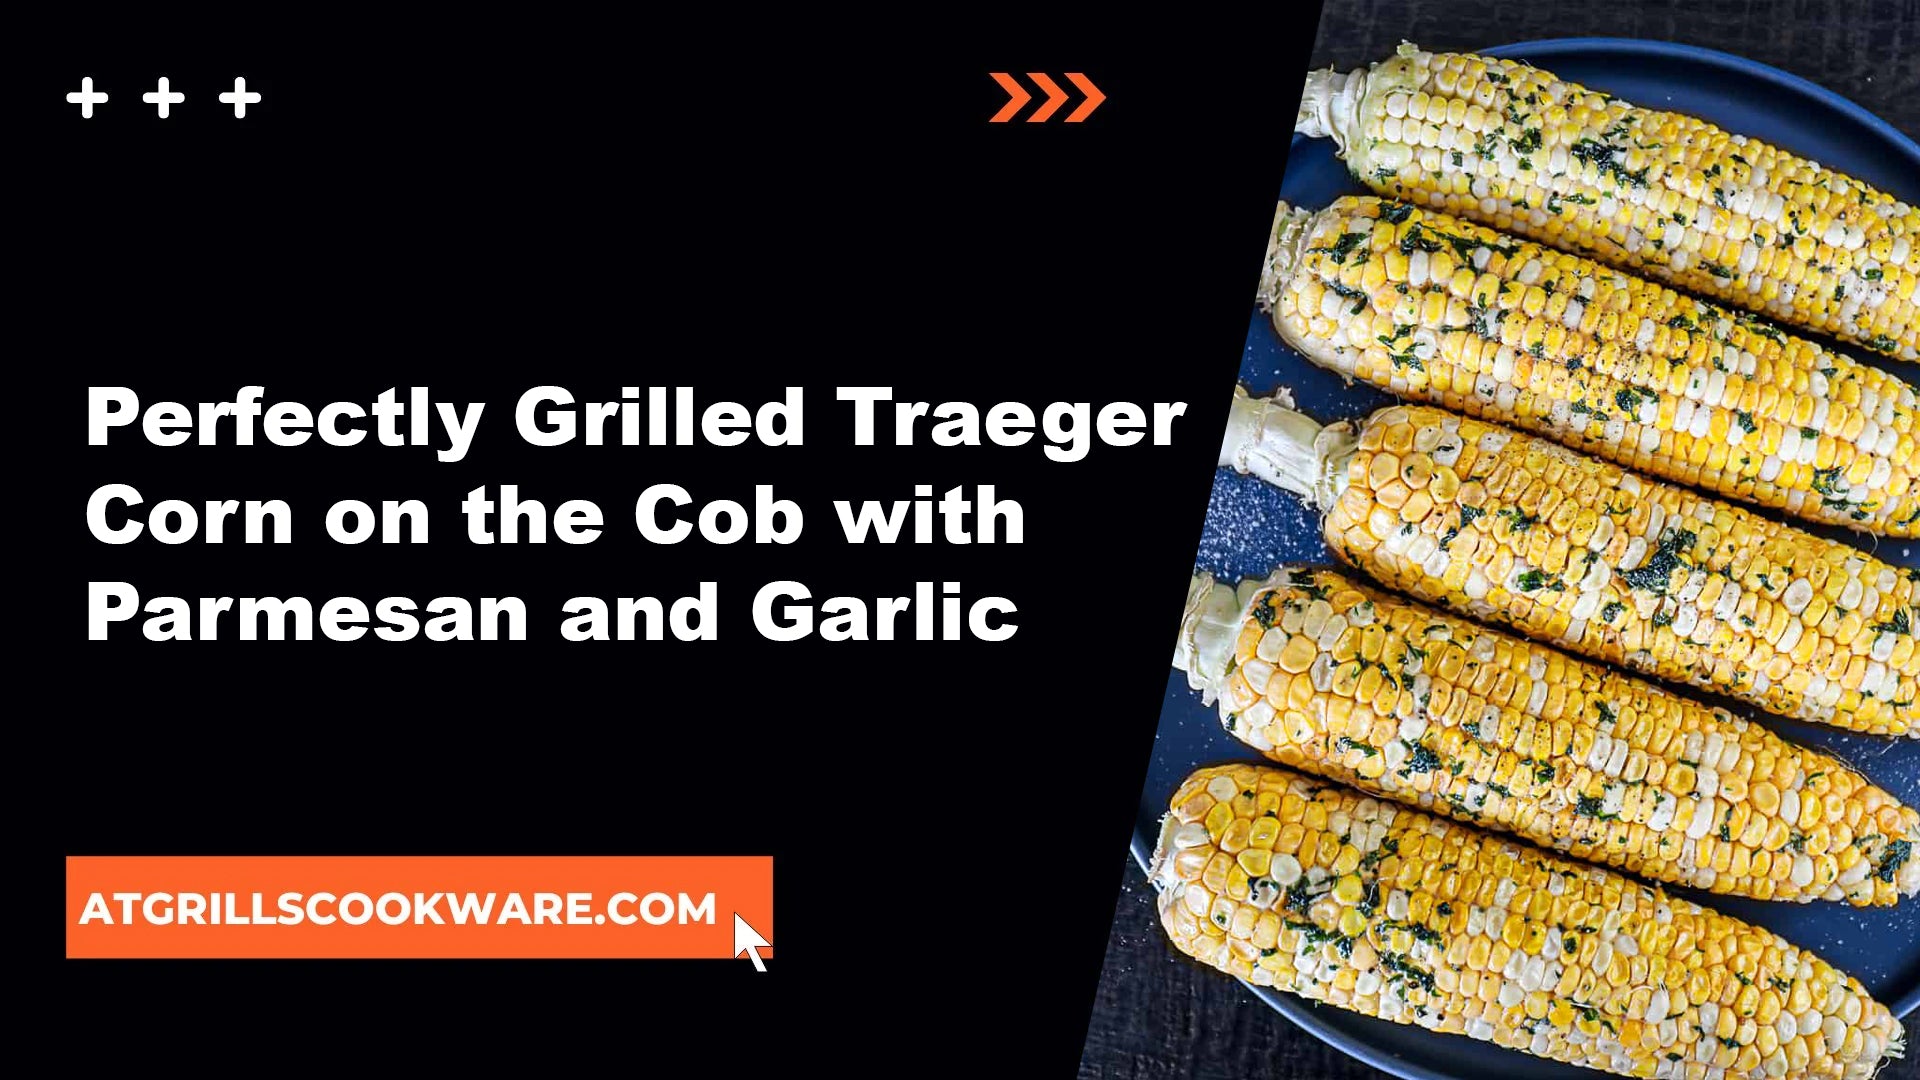 How to Grill Traeger Corn on the Cob with Parmesan and Garlic